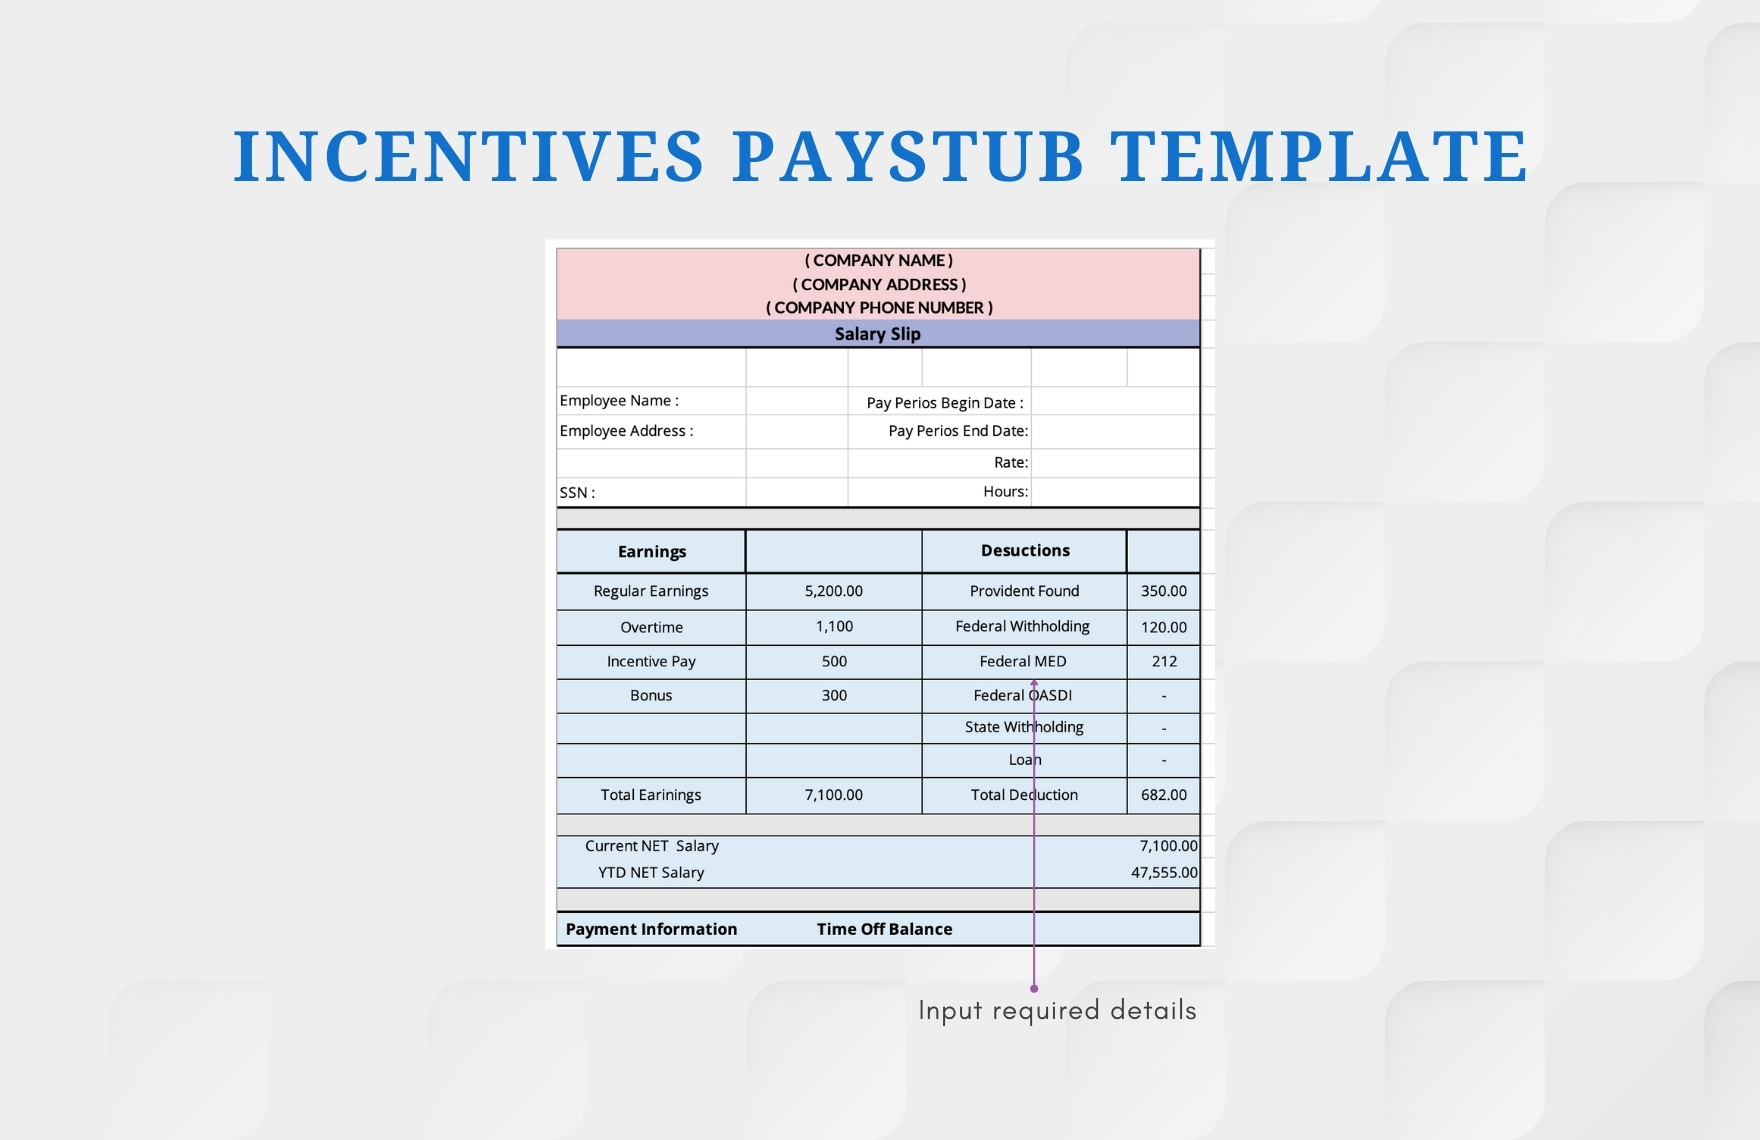 Incentives Paystub Template